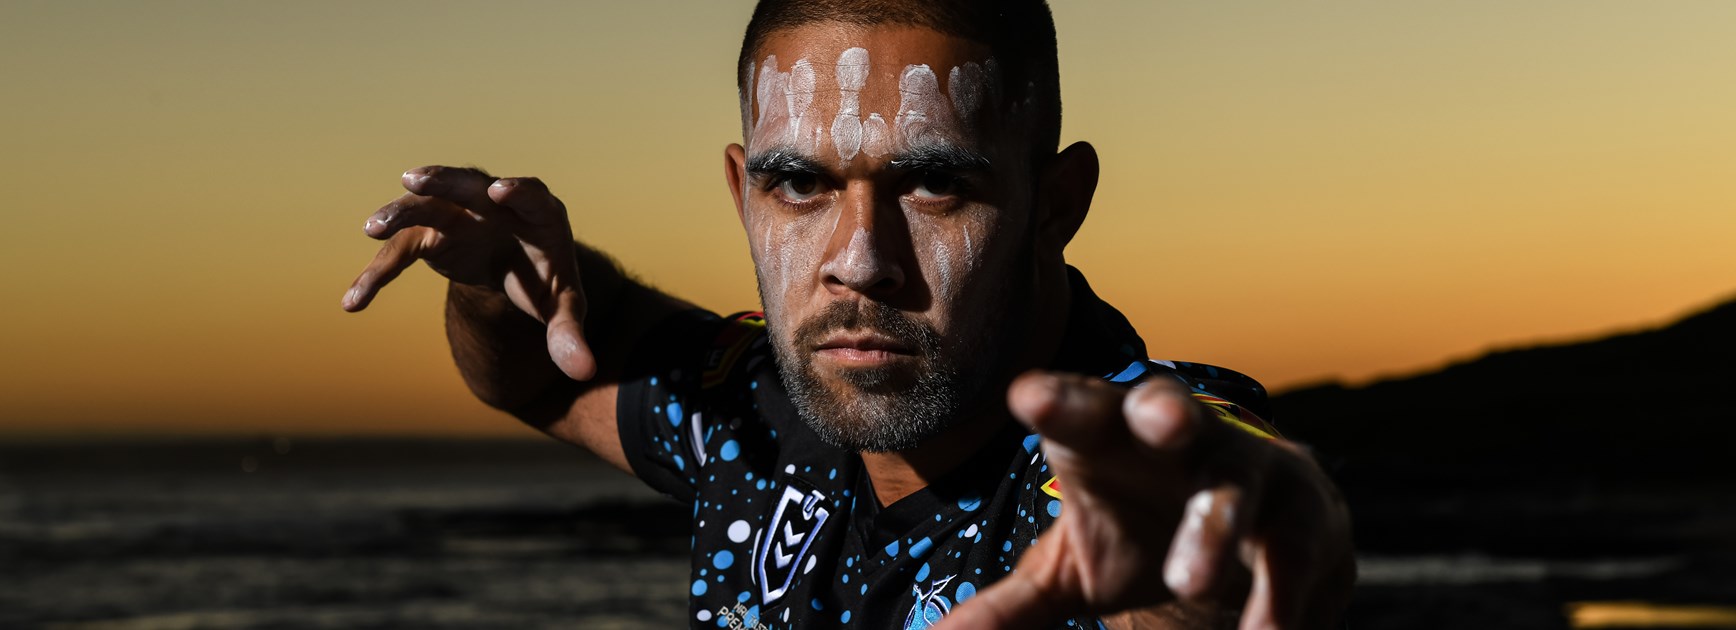 Cronulla Sharks - Welcome to NRL Indigenous Round 🖤💛❤️ #UpUp